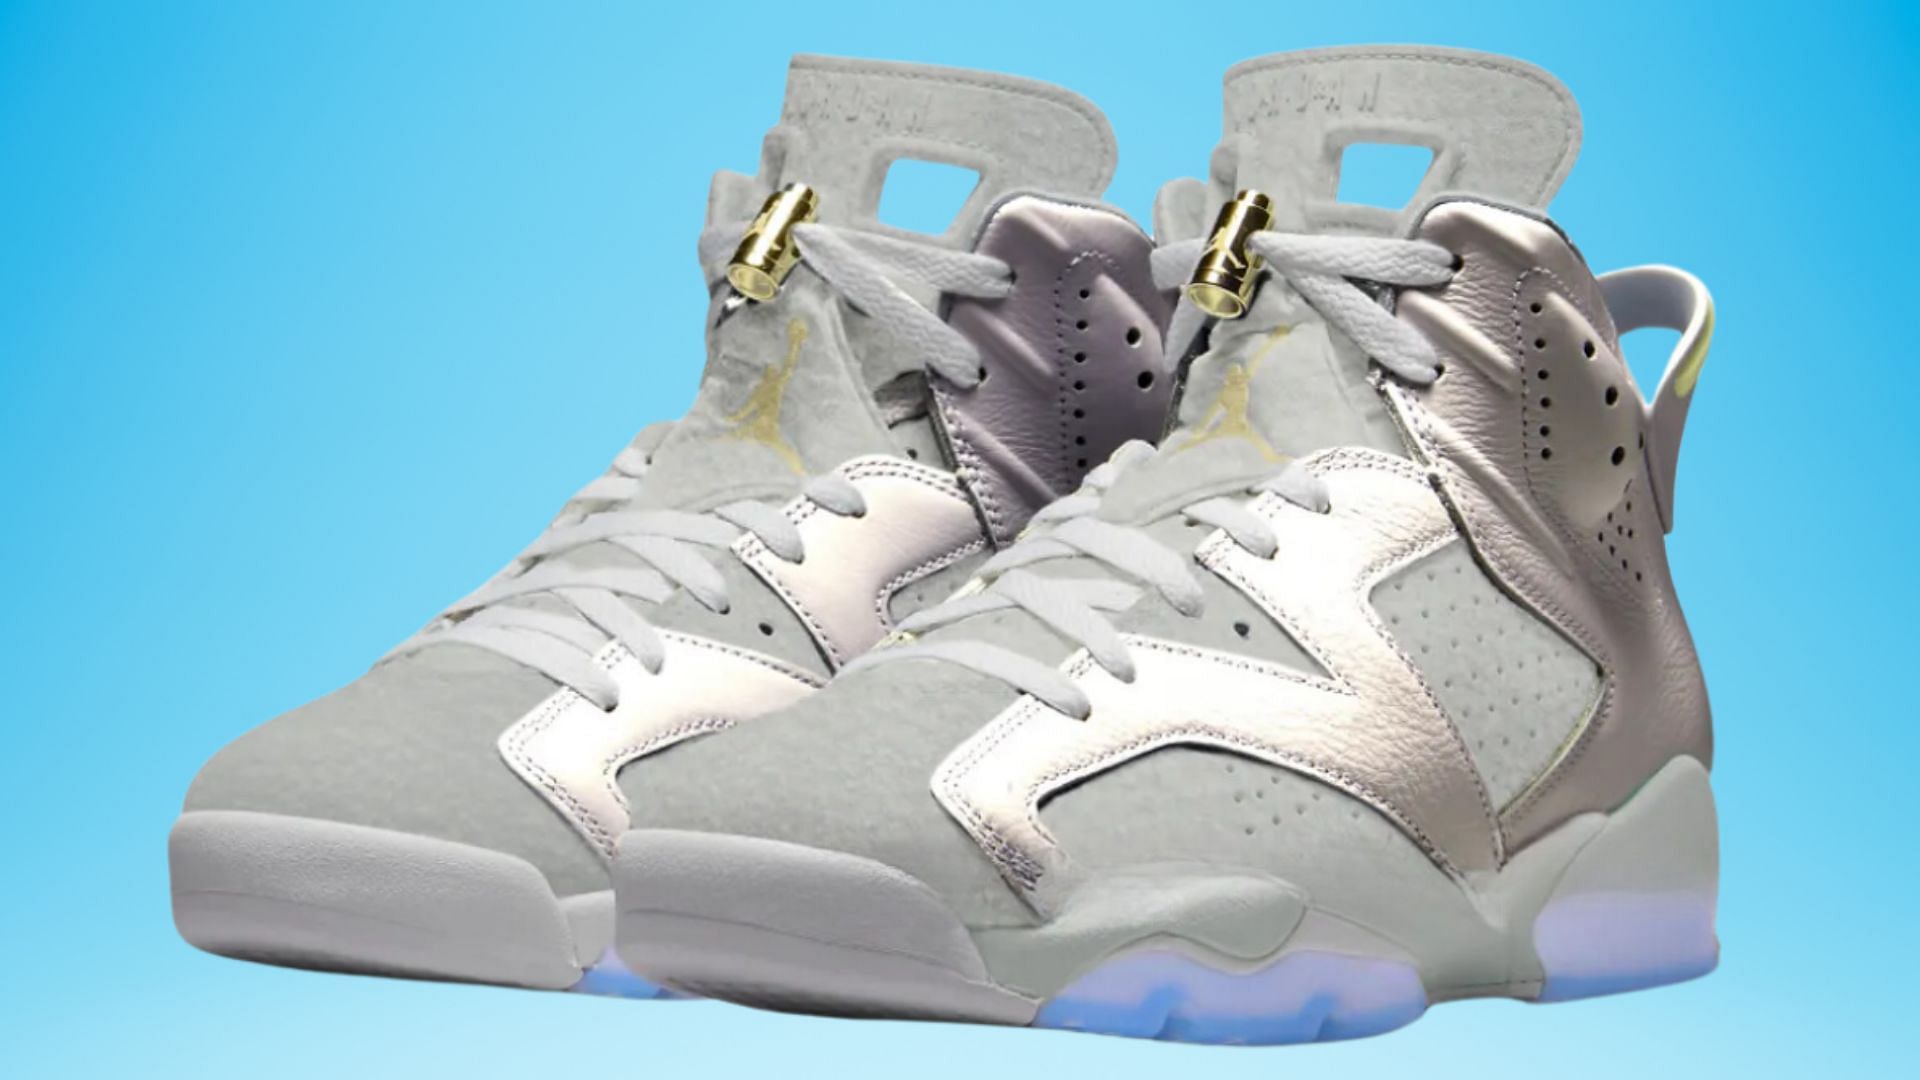 Here&#039;s another look at the mockup sneaker image (Image via Sole Retriever)